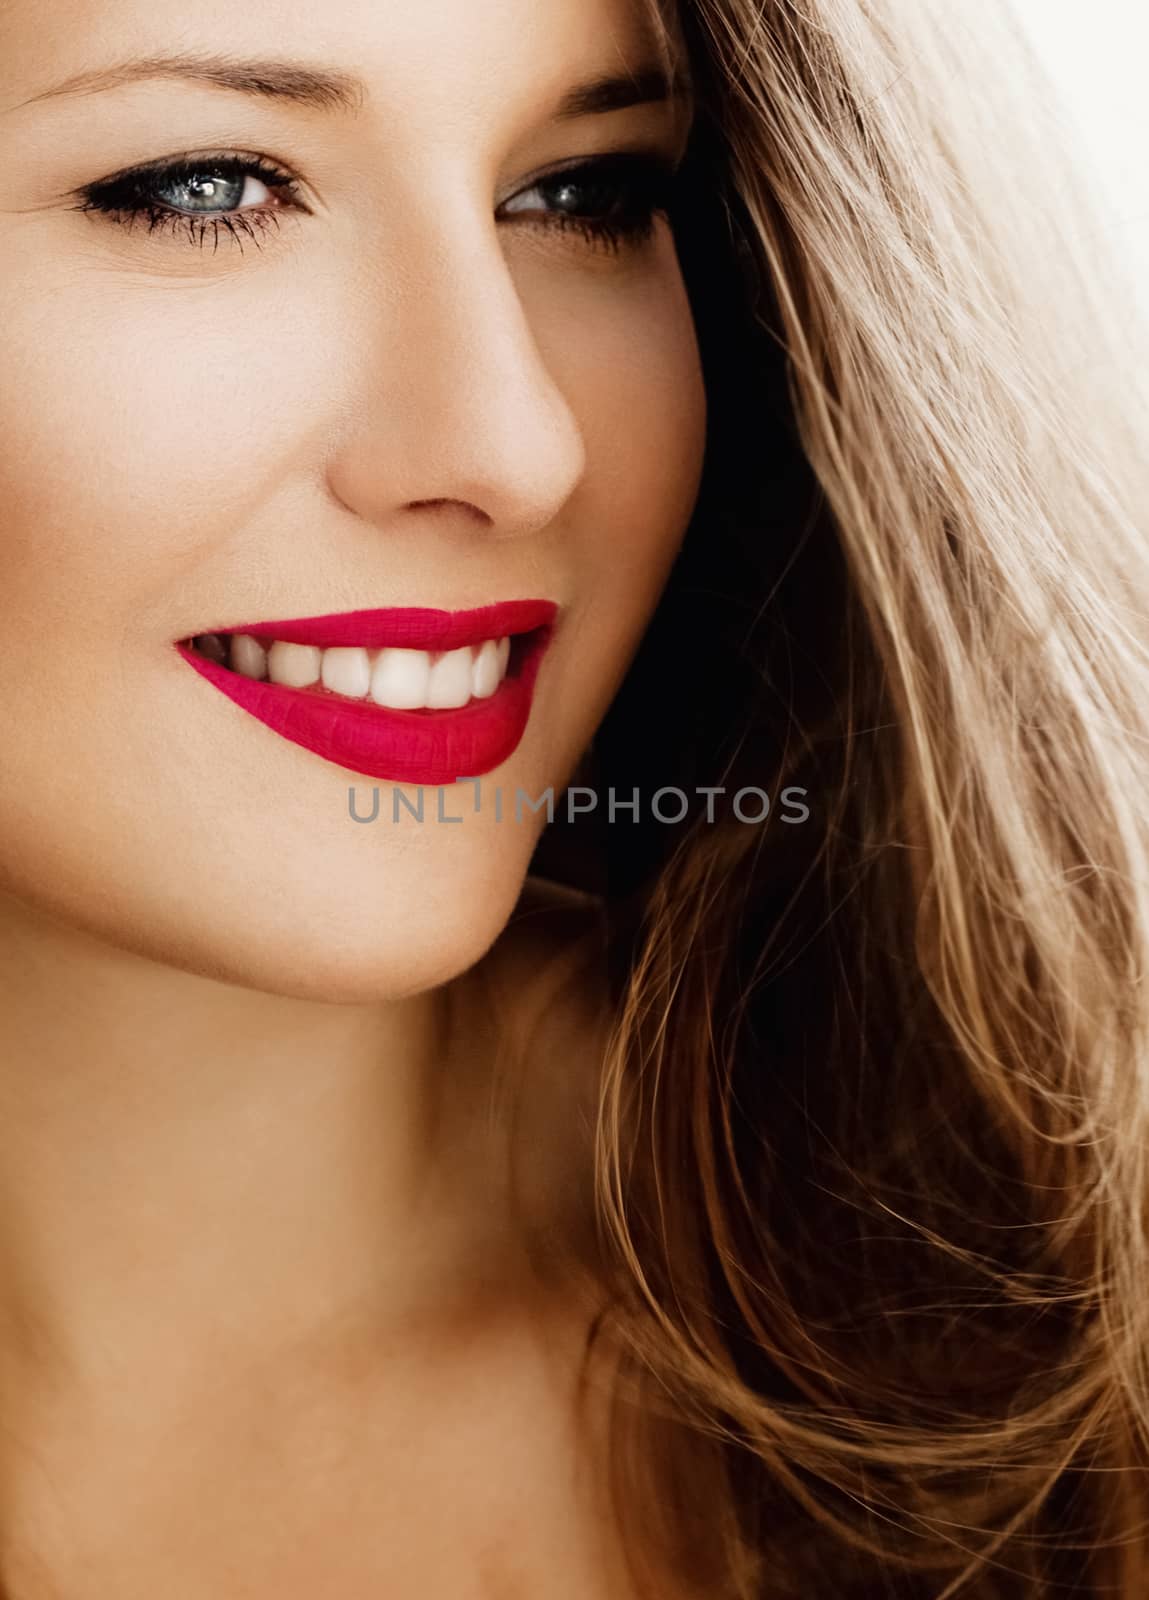 Attractive woman smiling, brunette with long light brown hair, g by Anneleven